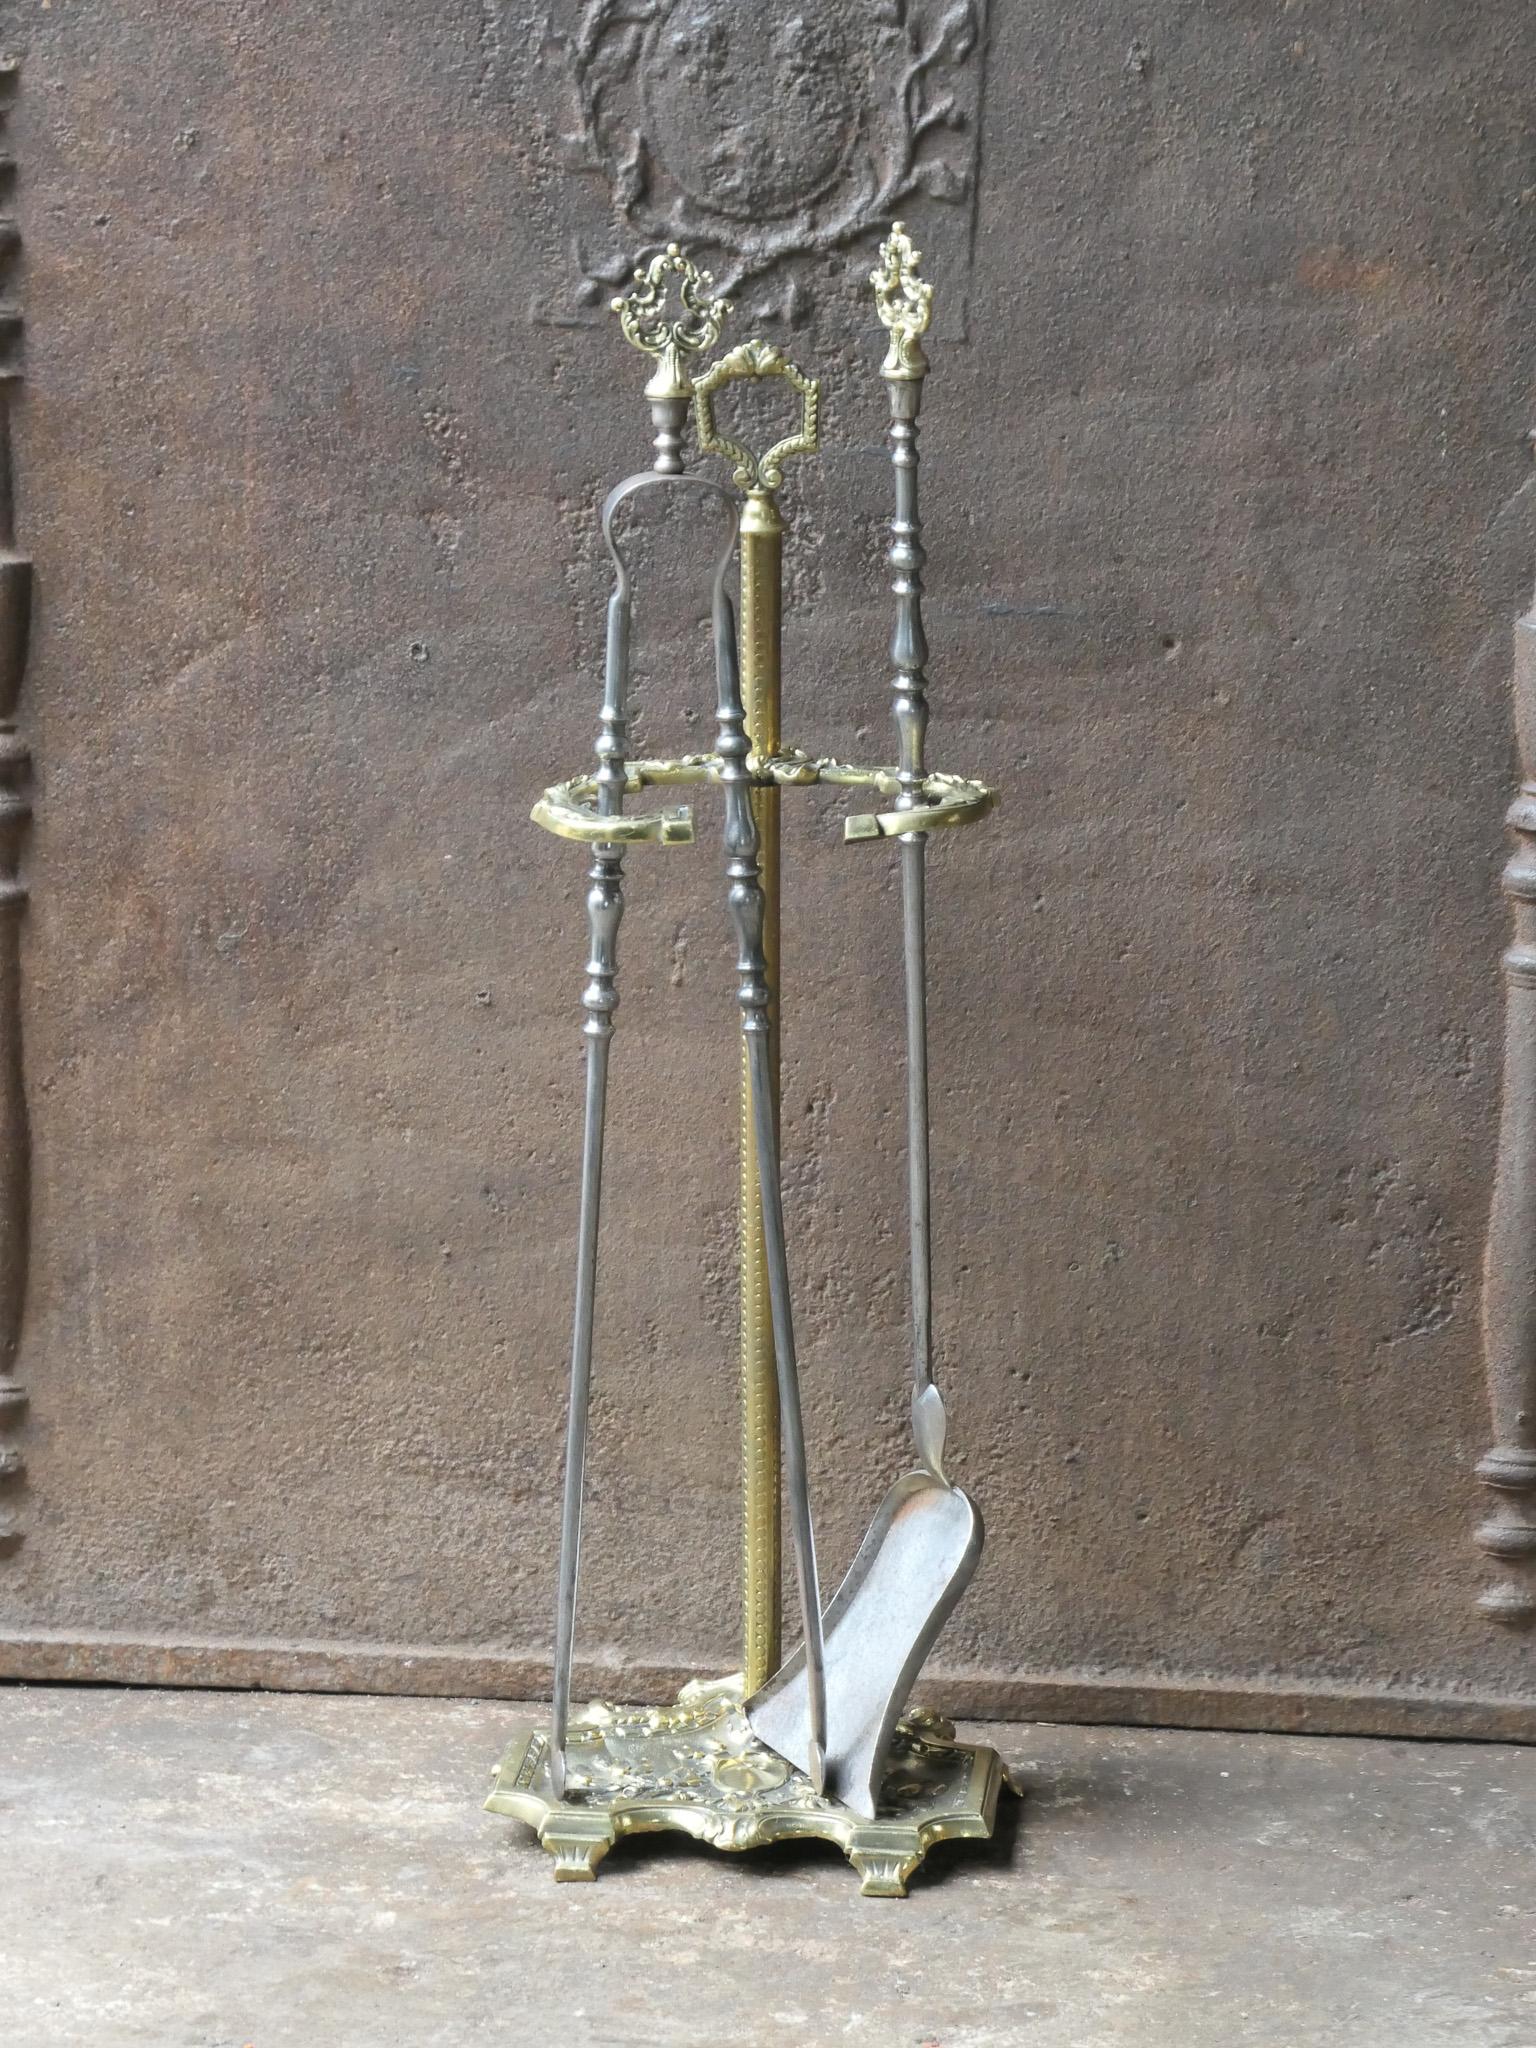 Late 19th or early 20th century French Napoleon III fireplace tool set. The toolset consists of a stand and two fire irons. Made of wrought iron and brass. It is in a good condition and is fully functional.
 
 





 